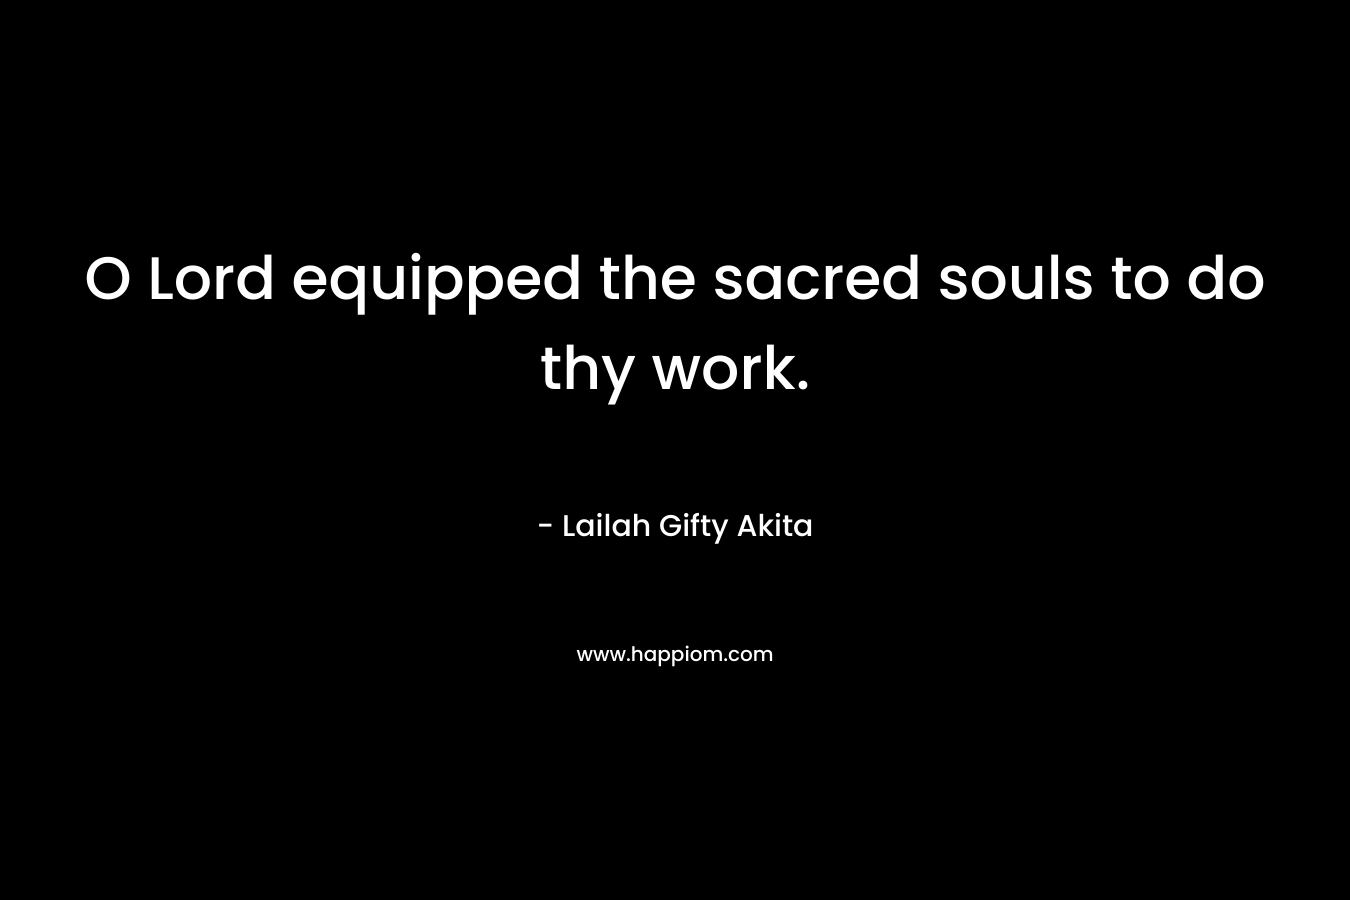 O Lord equipped the sacred souls to do thy work.